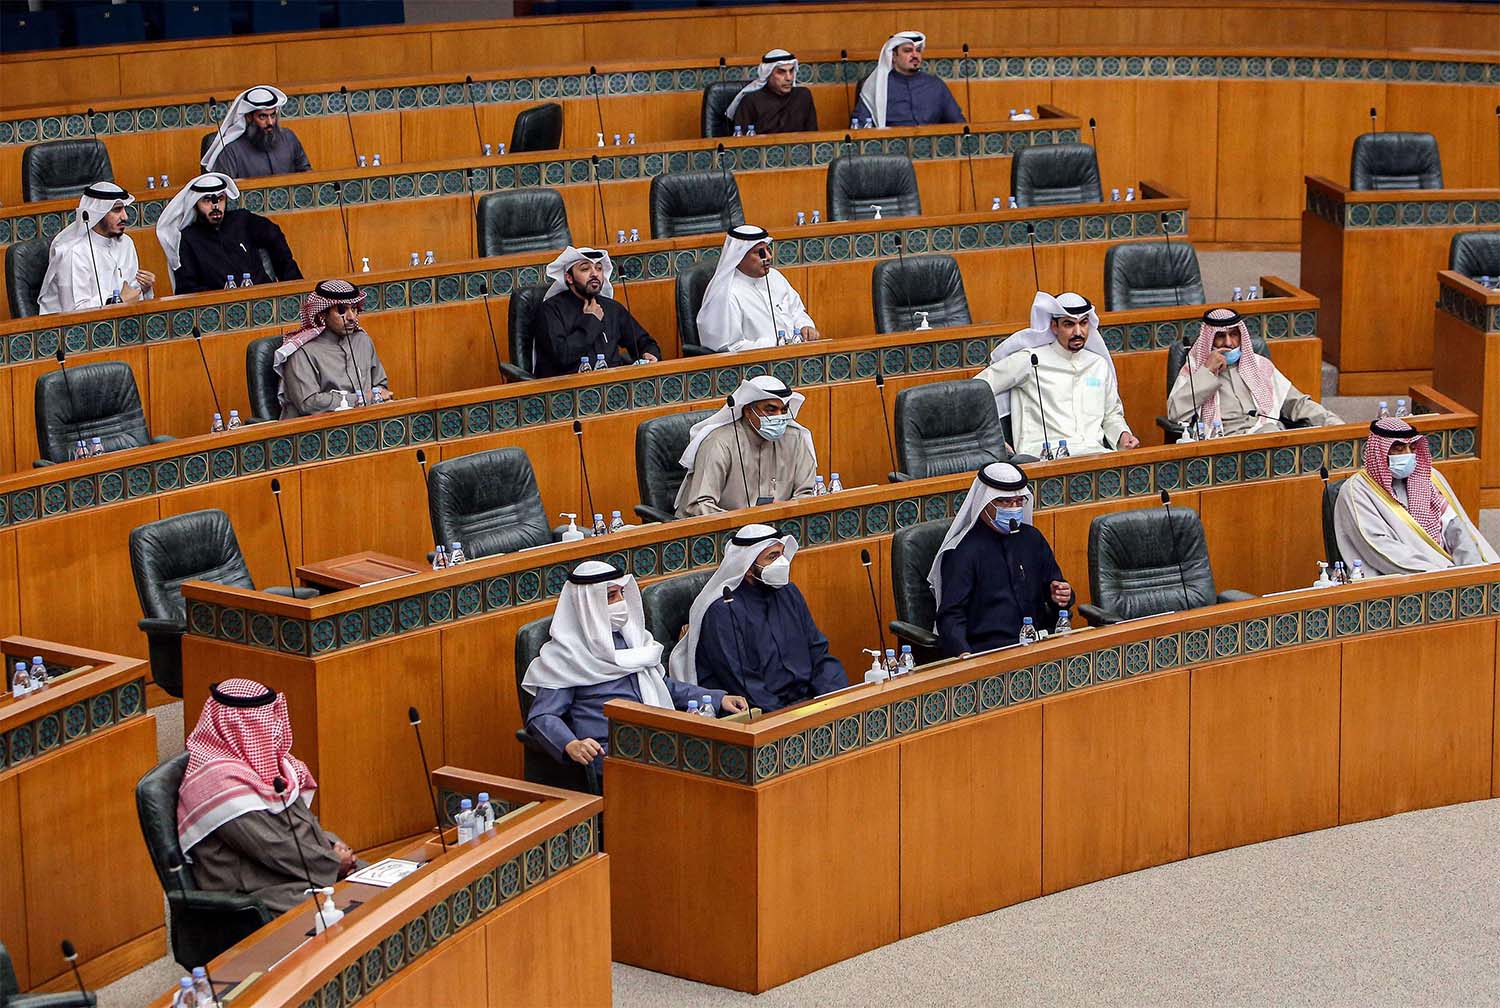 Kuwait's emir ordered a one-month suspension of parliament sessions a month ago